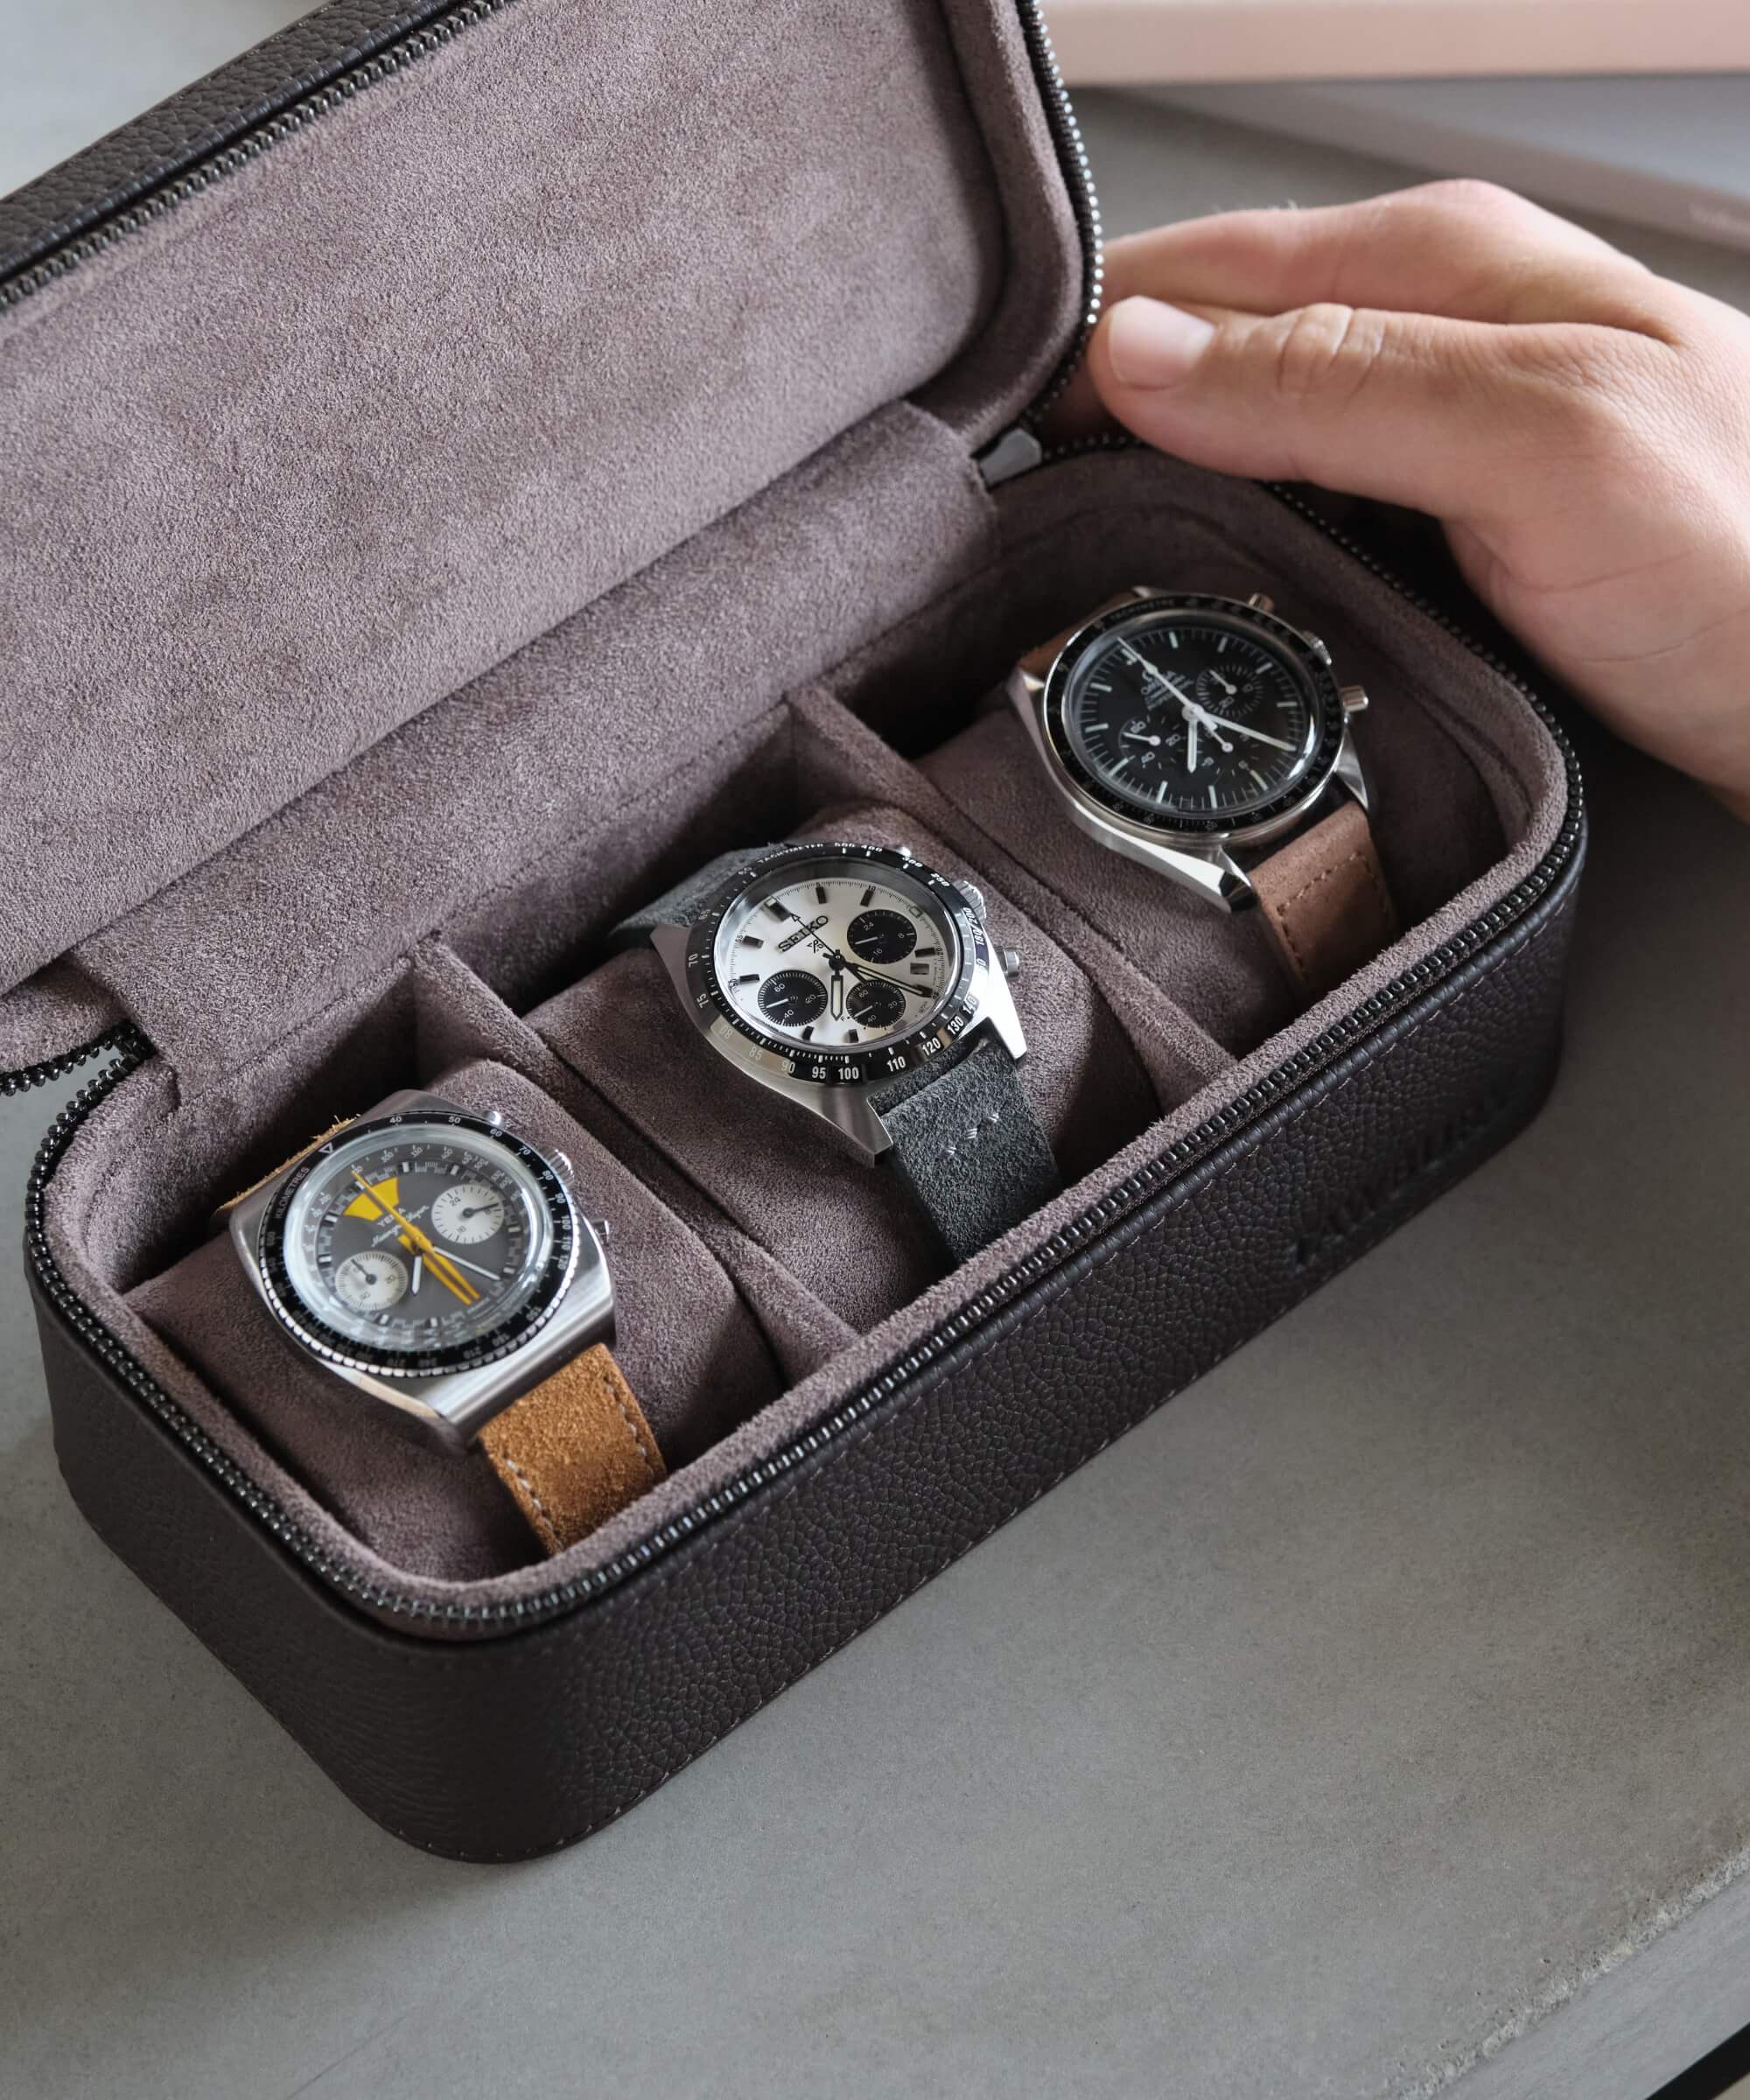 Three Fraser 3 Watch Travel Cases - Brown by TAWBURY in a compact leather case that offers protection for easy travel.